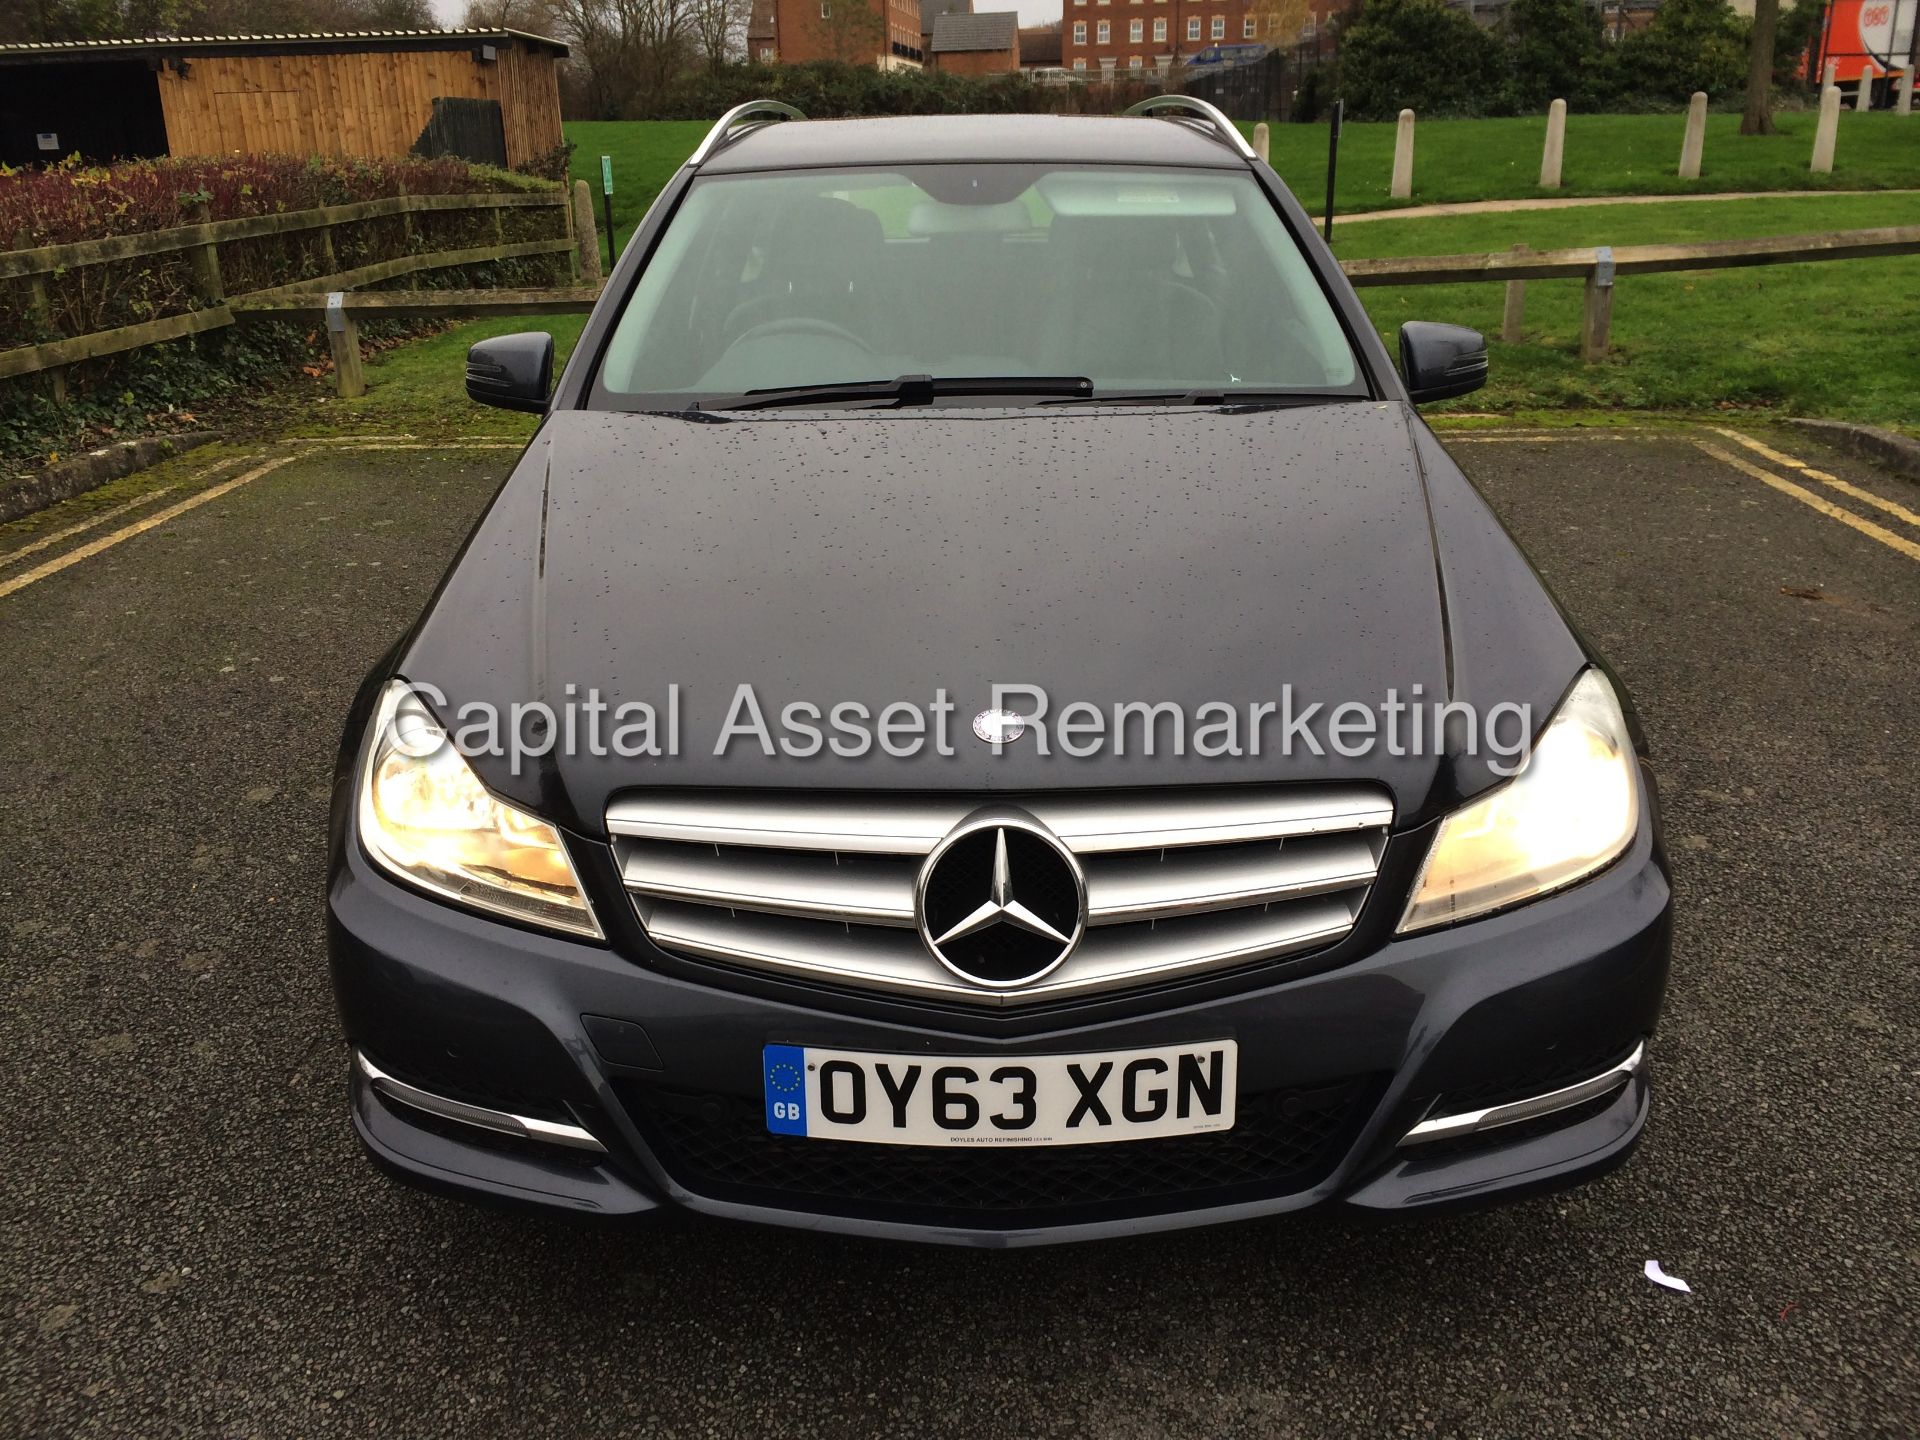 (ON SALE) MERCEDES-BENZ C220 CDI (2013 - 63 REG) 'BLUE EFFICIENCY' - 204 BHP (FACELIFT) LEATHER - Image 2 of 21